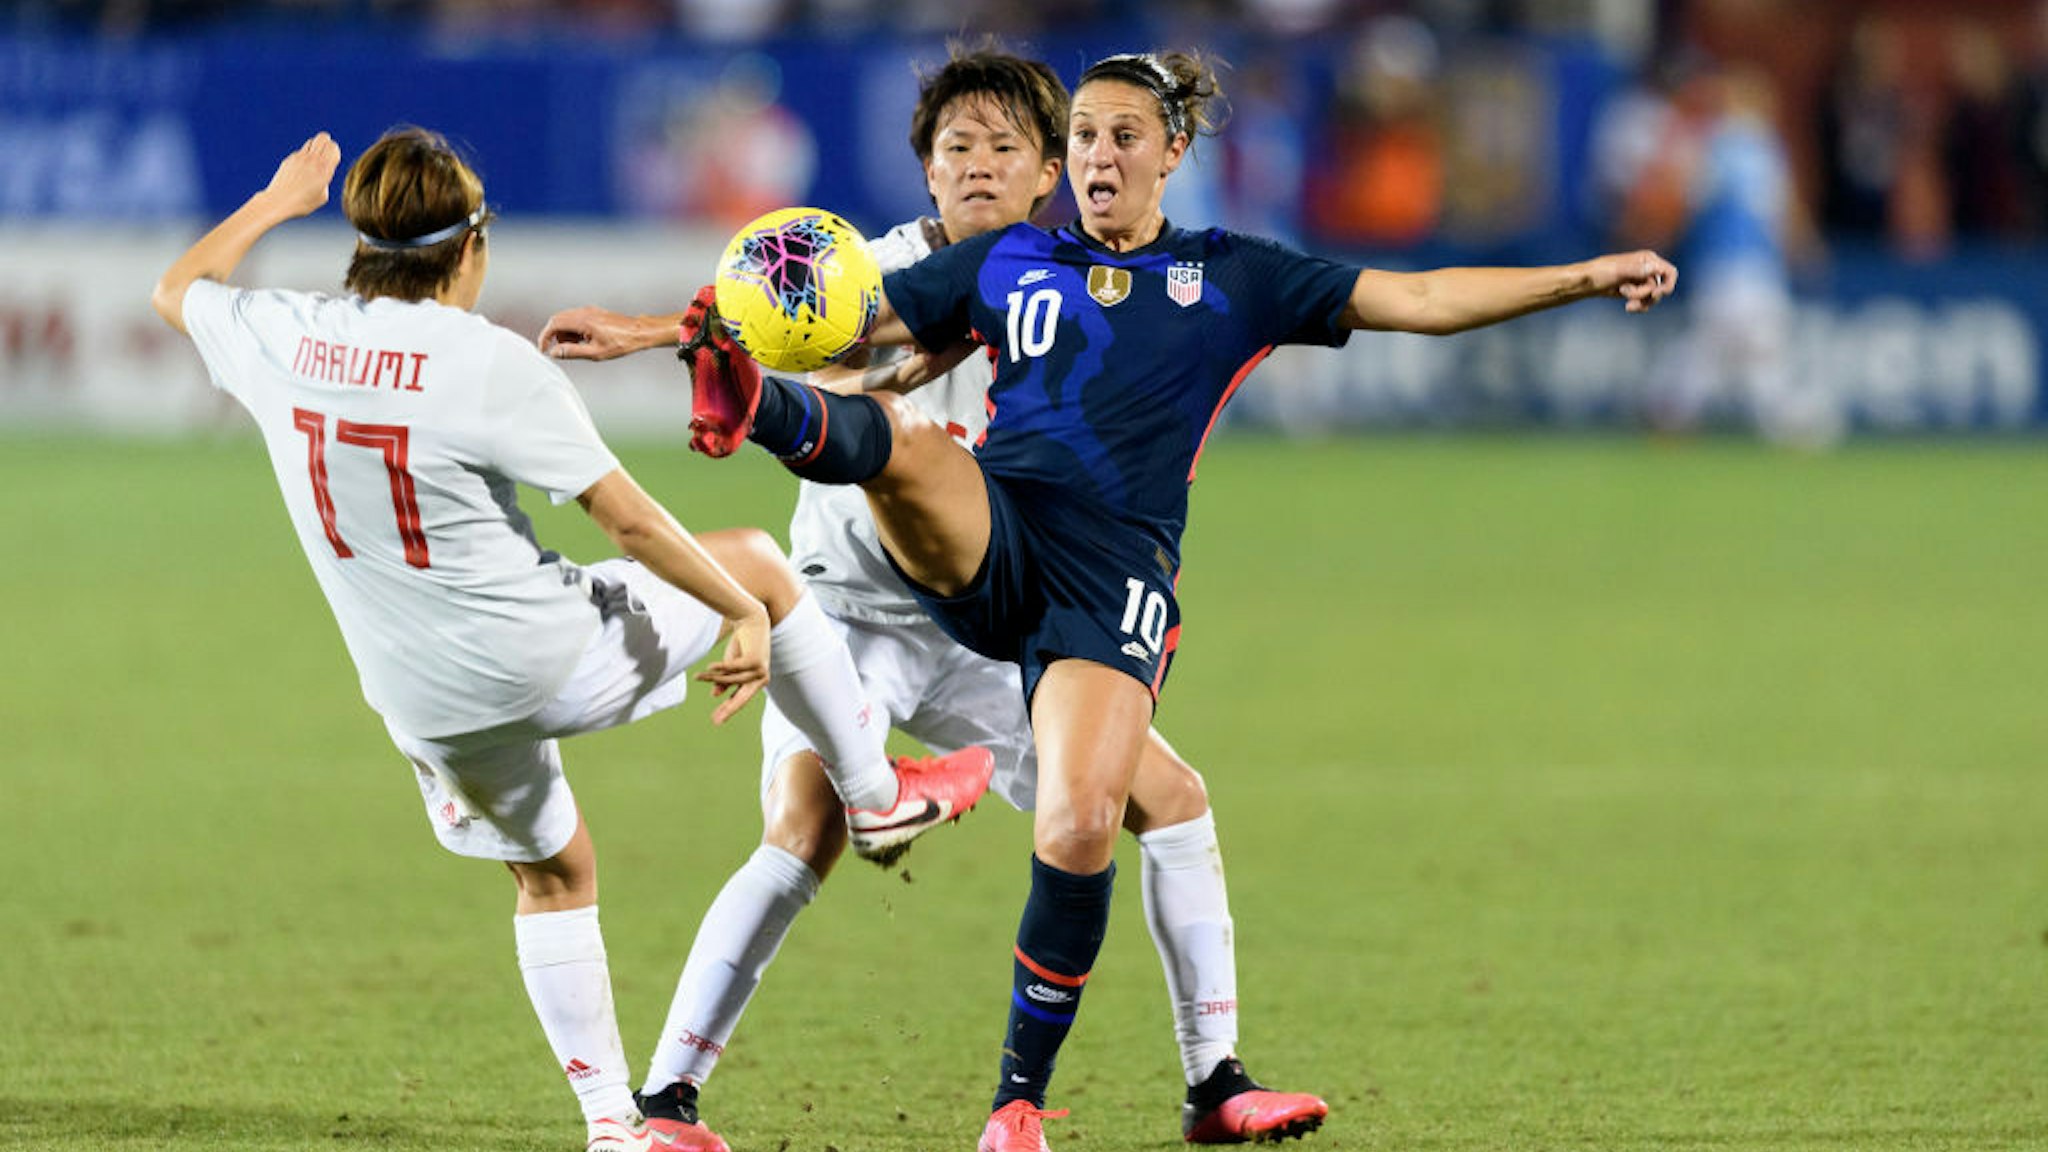 Carli Lloyd #10 of the United States reaches out to gain control of a loose ball with Moeka Minami #5 and Narumi Miura #17 of Japan on either side of her during a game between Japan and USWNT at Toyota Stadium on March 11, 2020 in Frisco, Texas.